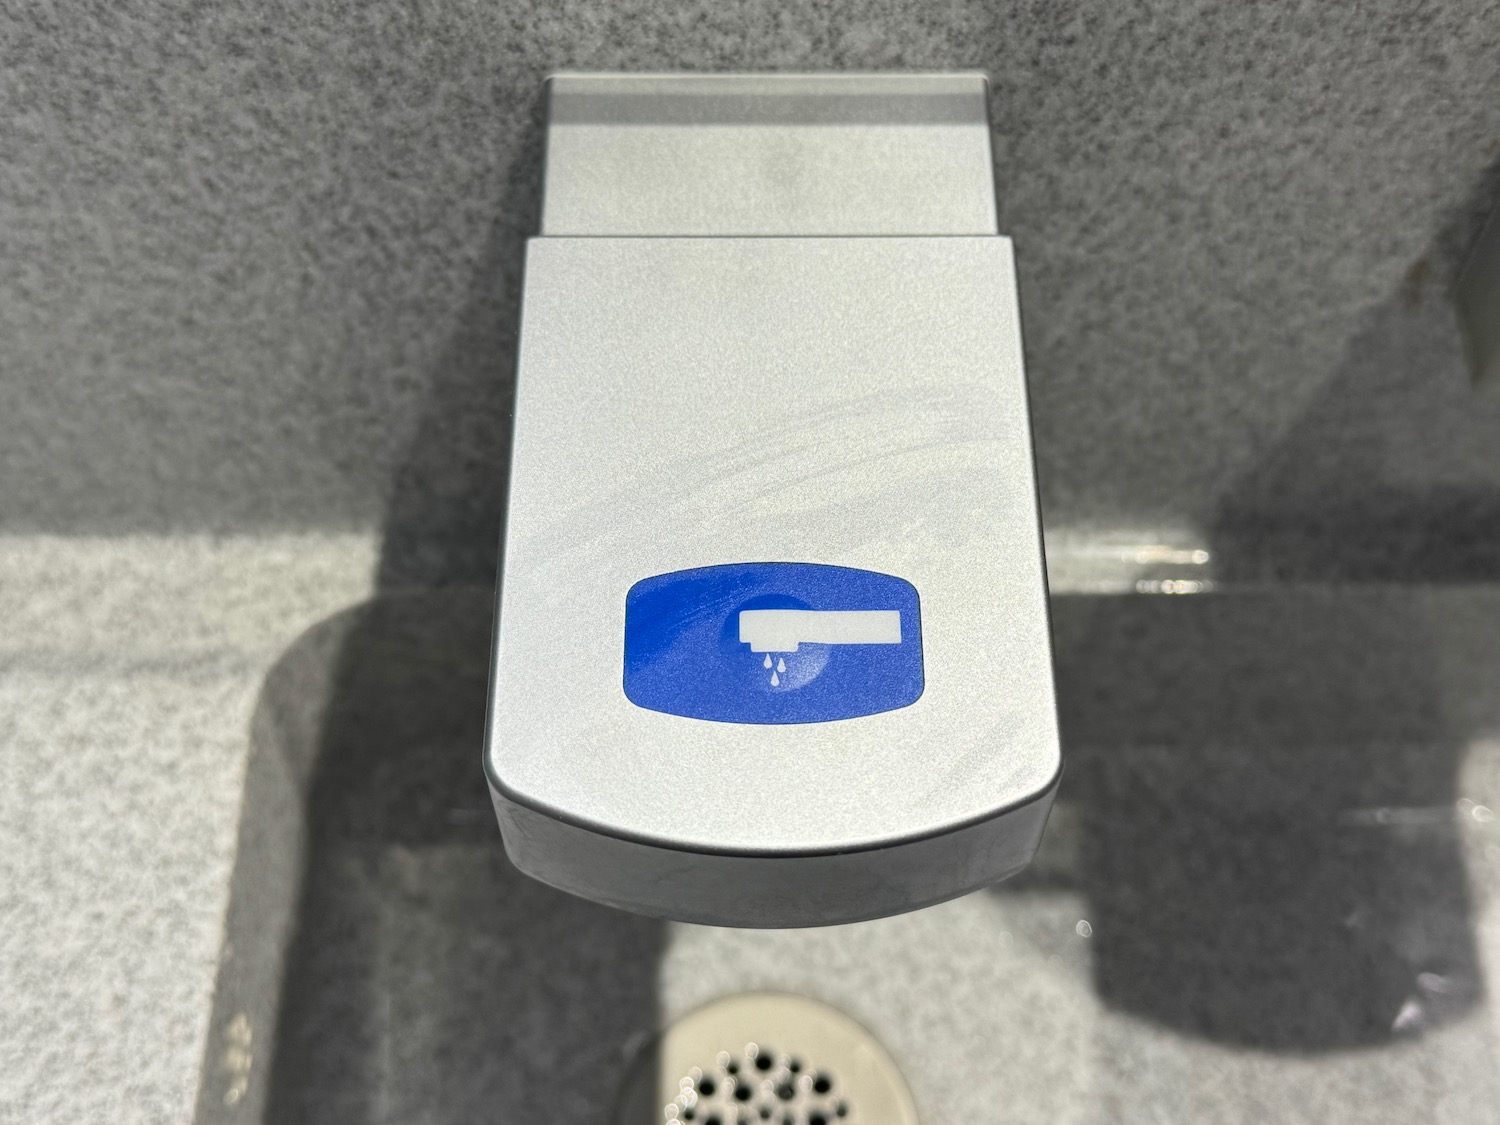 a grey soap dispenser with a blue and white logo